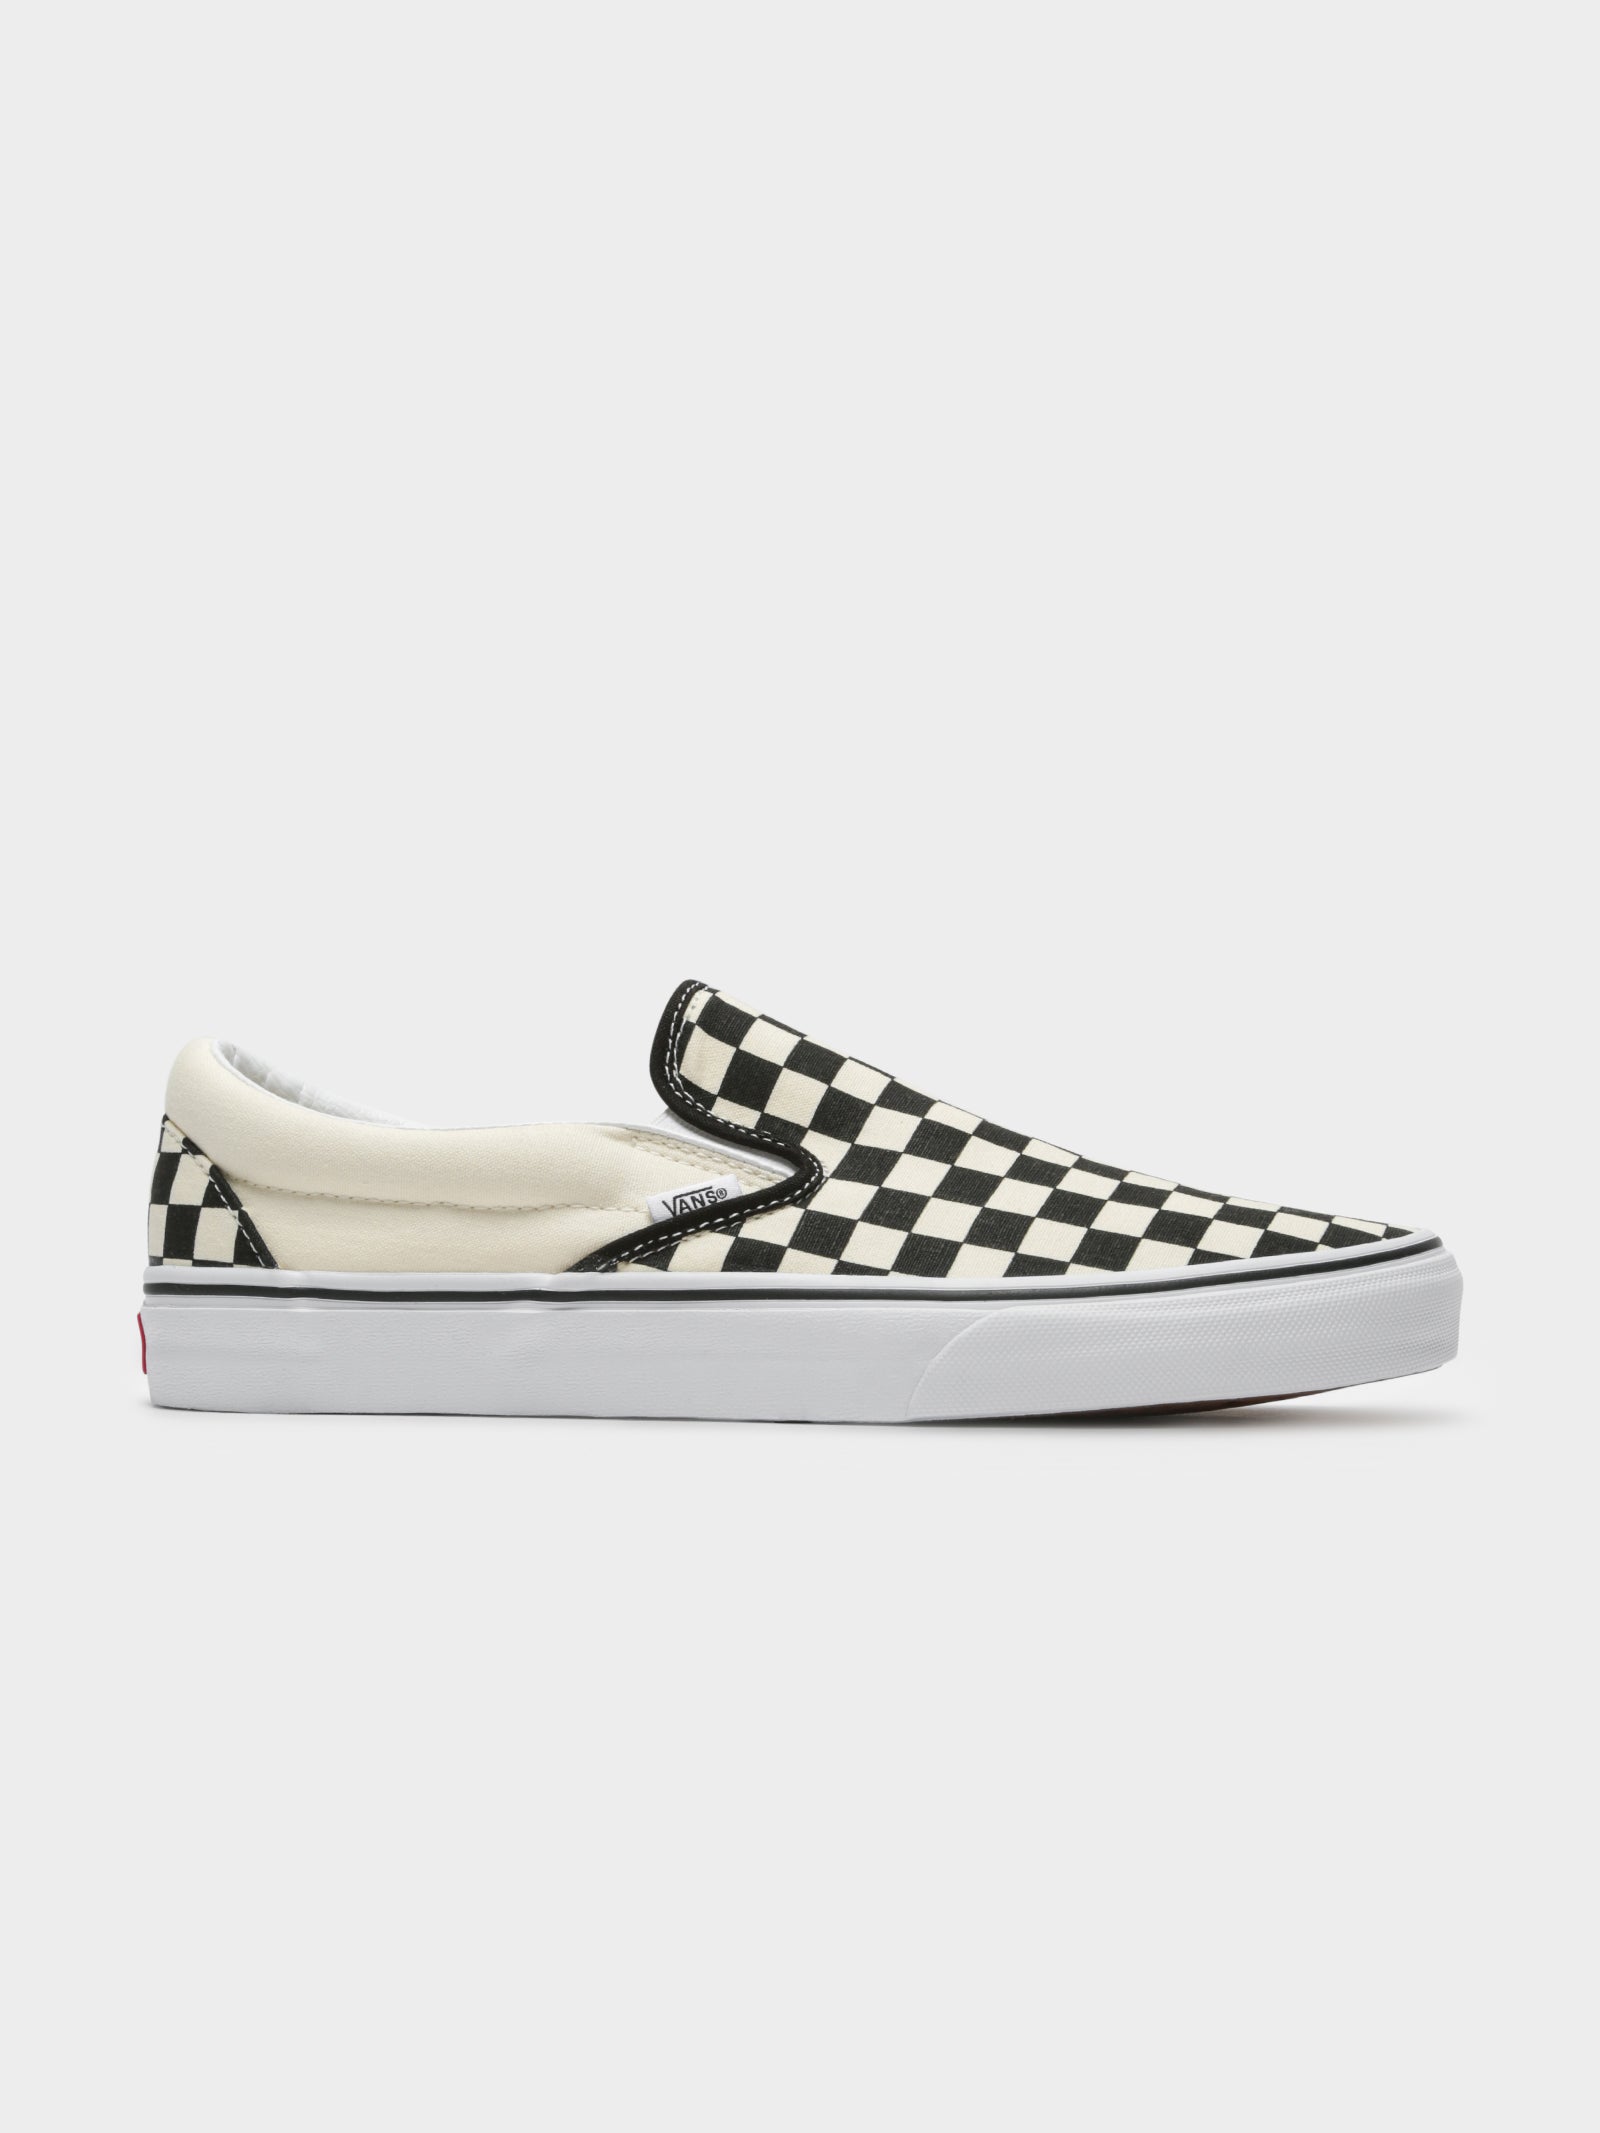 Unisex Classic Slip-On Sneakers in Black and White Checkerboard - Store